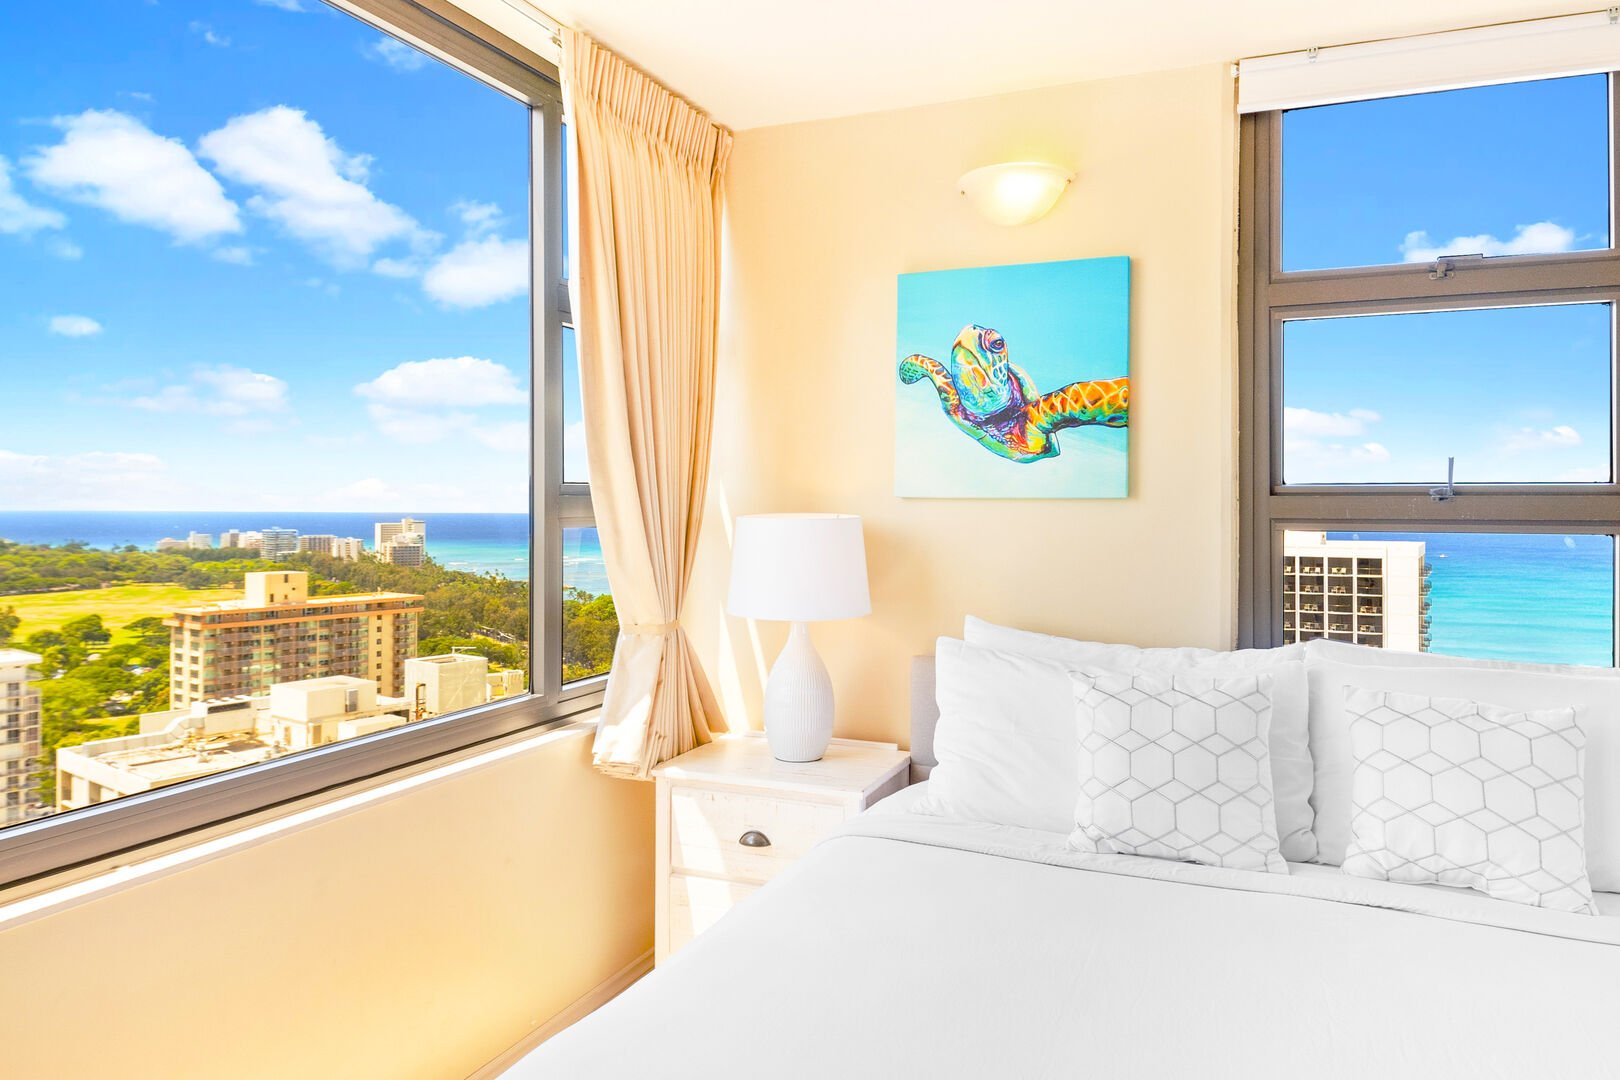 Relax on your king-size bed while enjoying the beautiful view of the Diamond head mountain and the ocean!